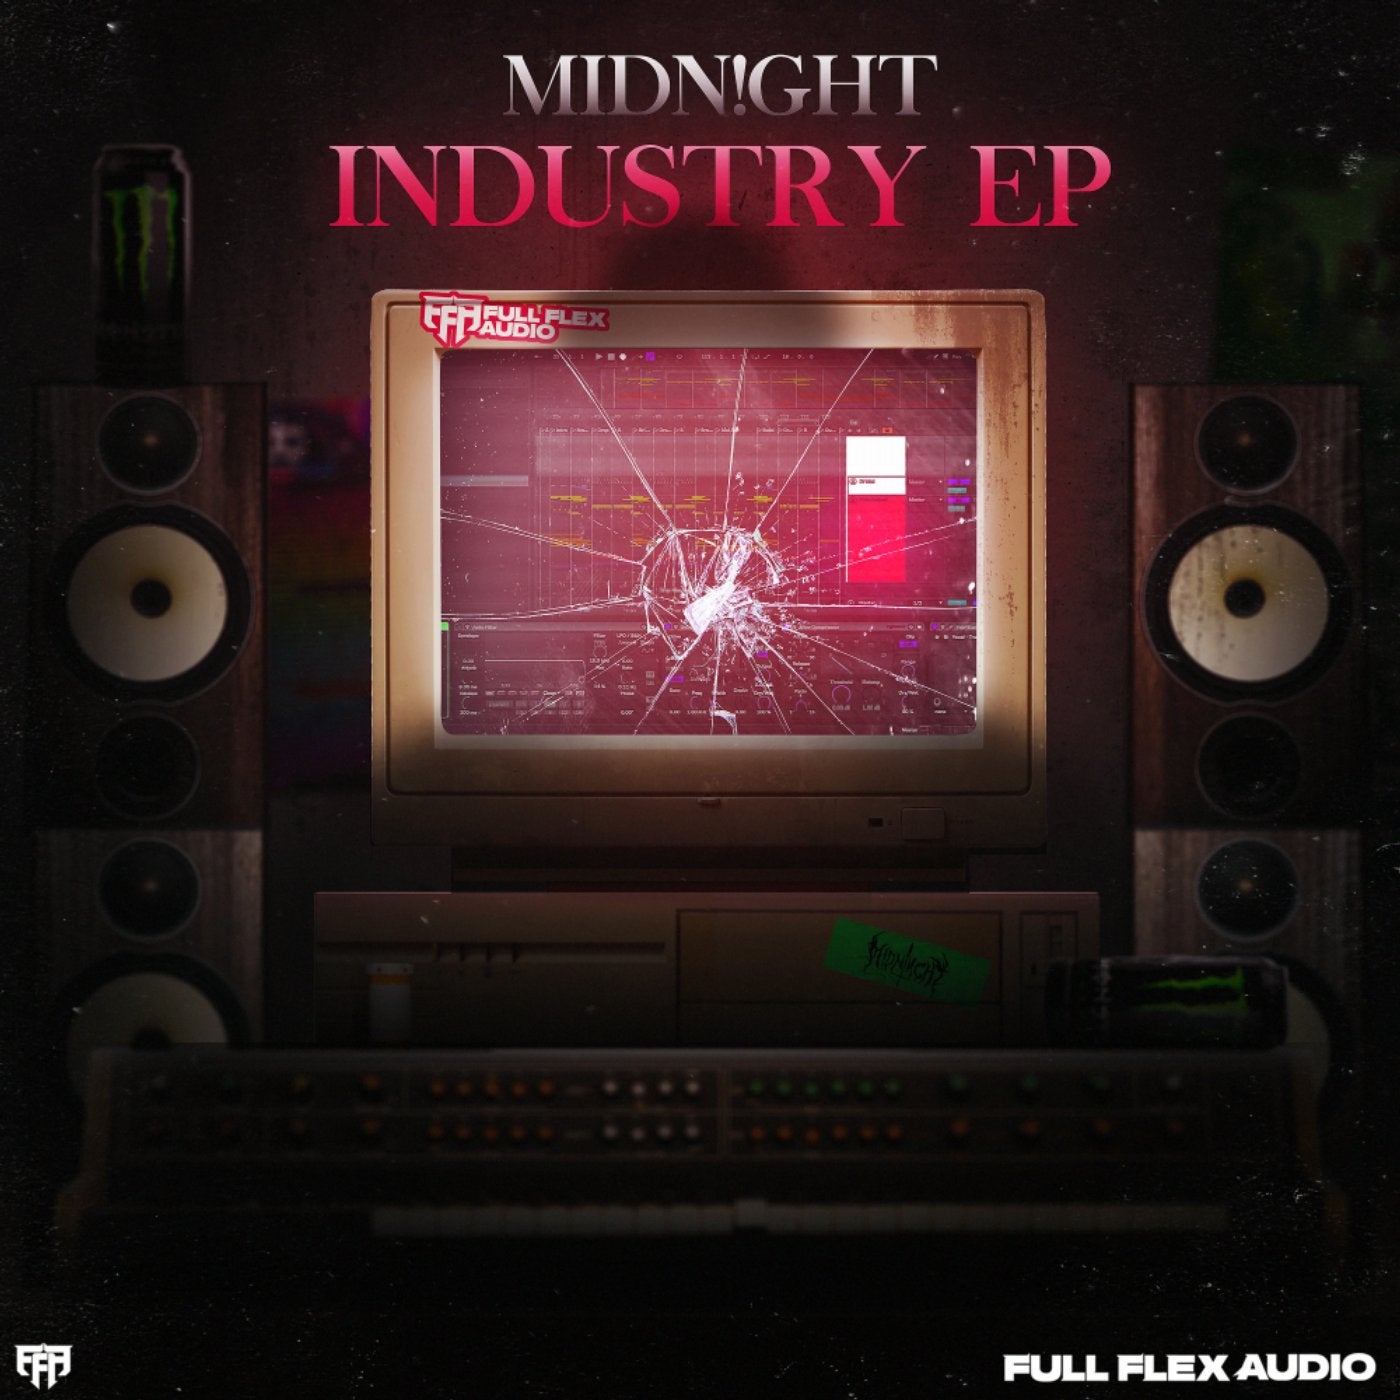 Industry EP